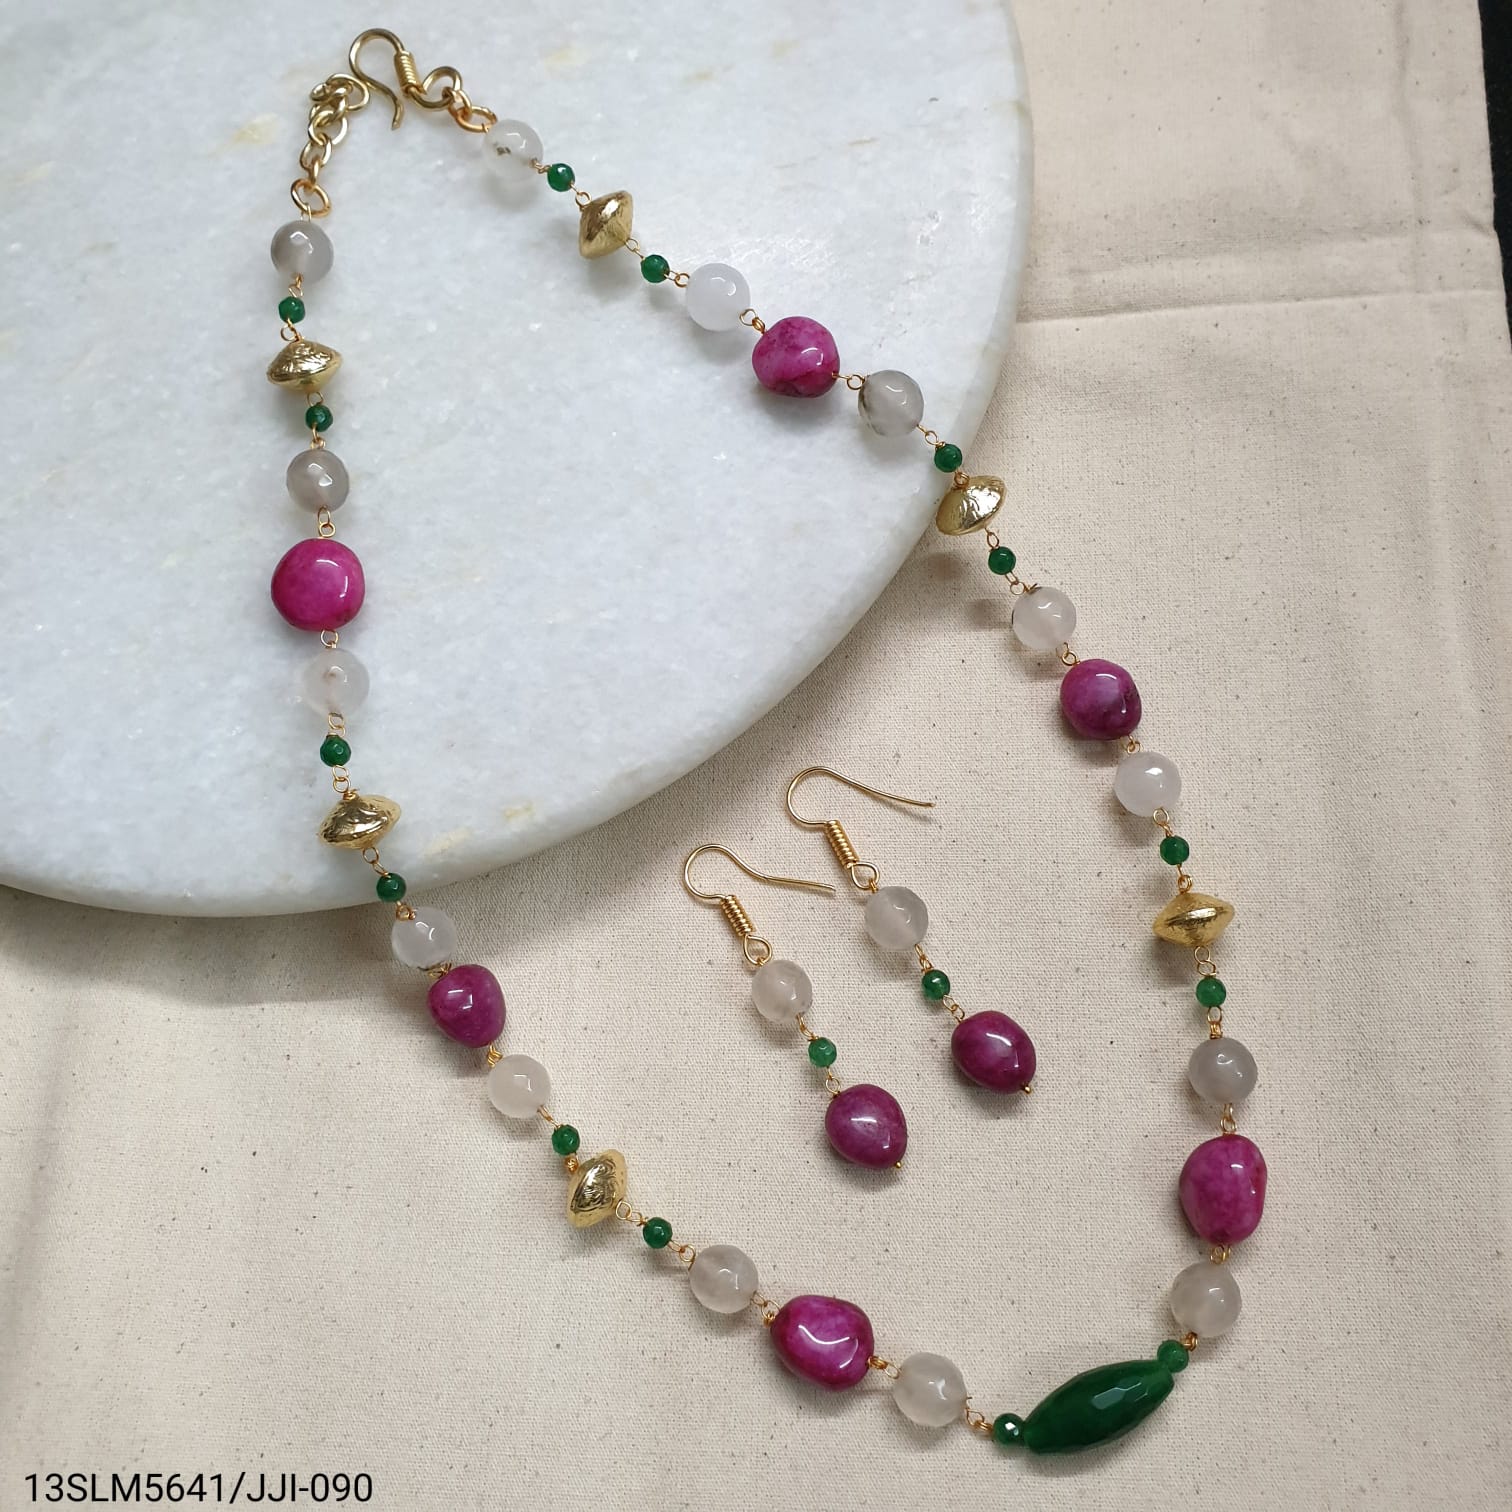 Hot Pink and Offiwhite Stone Necklace